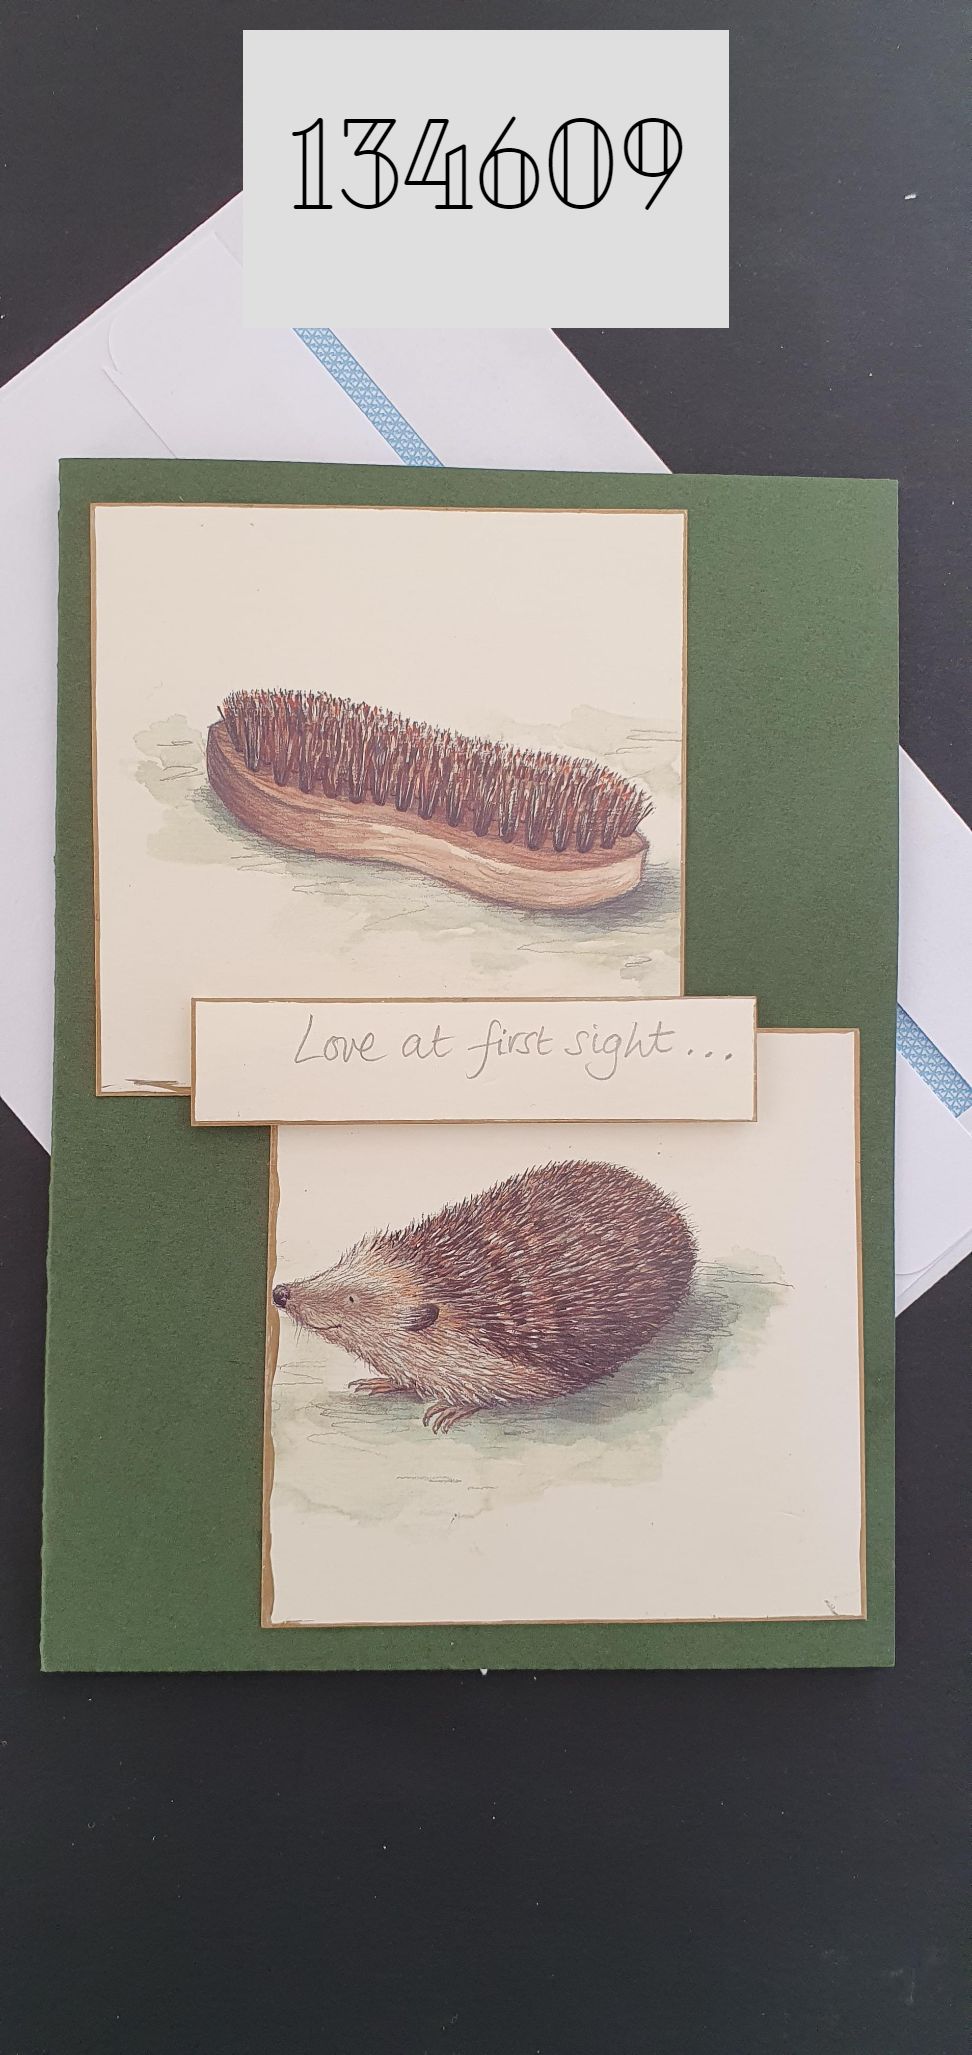 Valentine cards - unspecified/various front page greetings